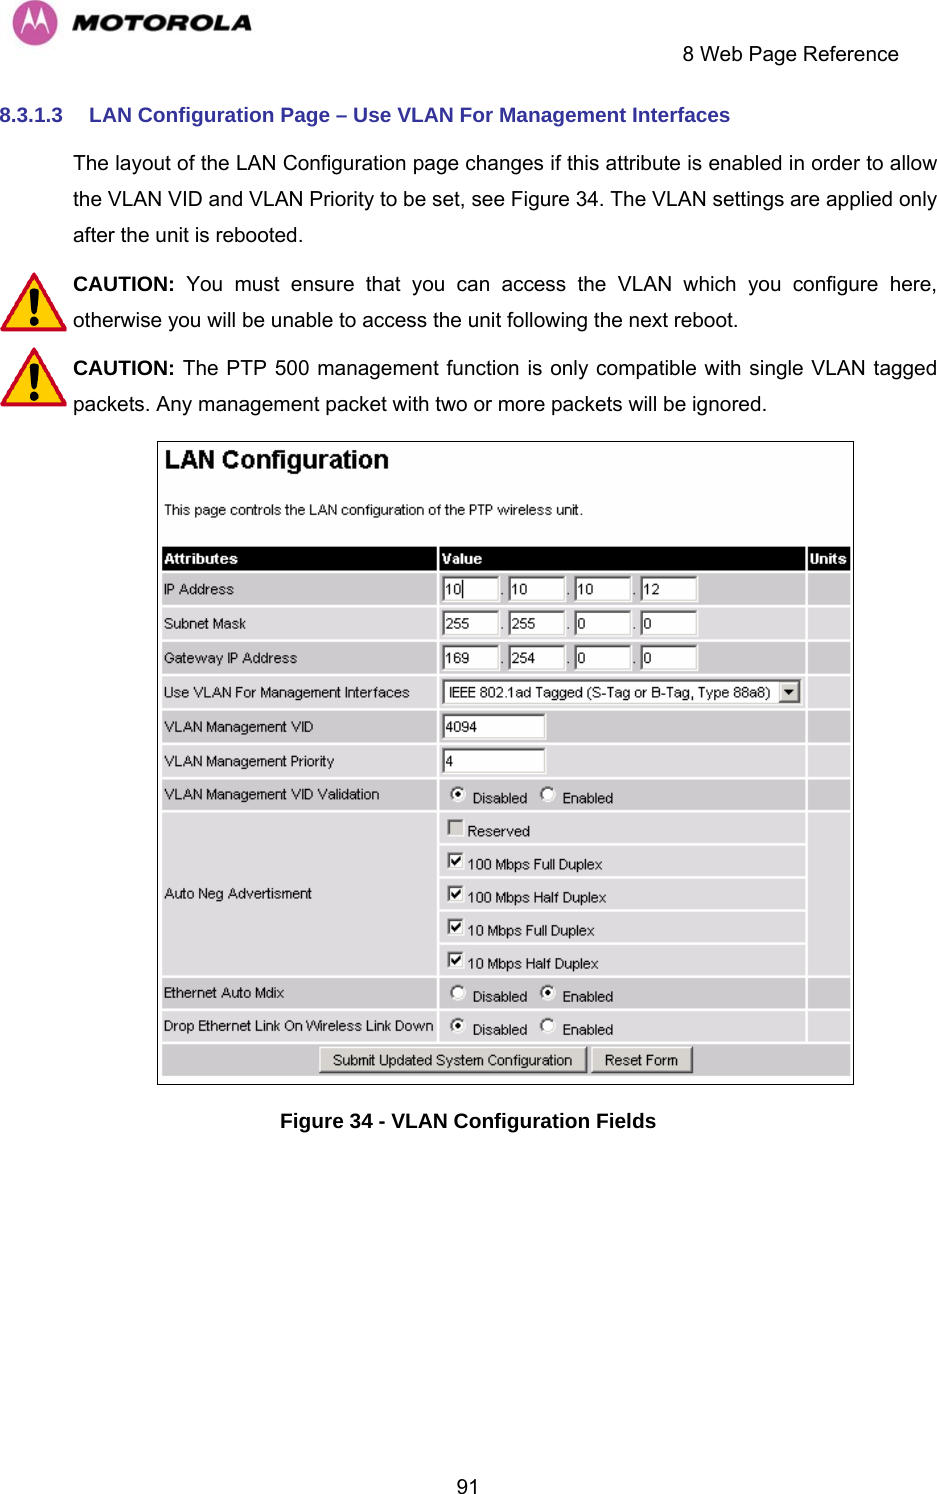     8 Web Page Reference  918.3.1.3  LAN Configuration Page – Use VLAN For Management Interfaces The layout of the LAN Configuration page changes if this attribute is enabled in order to allow the VLAN VID and VLAN Priority to be set, see Figure 34. The VLAN settings are applied only after the unit is rebooted. CAUTION:  You must ensure that you can access the VLAN which you configure here, otherwise you will be unable to access the unit following the next reboot. CAUTION: The PTP 500 management function is only compatible with single VLAN tagged packets. Any management packet with two or more packets will be ignored.  Figure 34 - VLAN Configuration Fields 